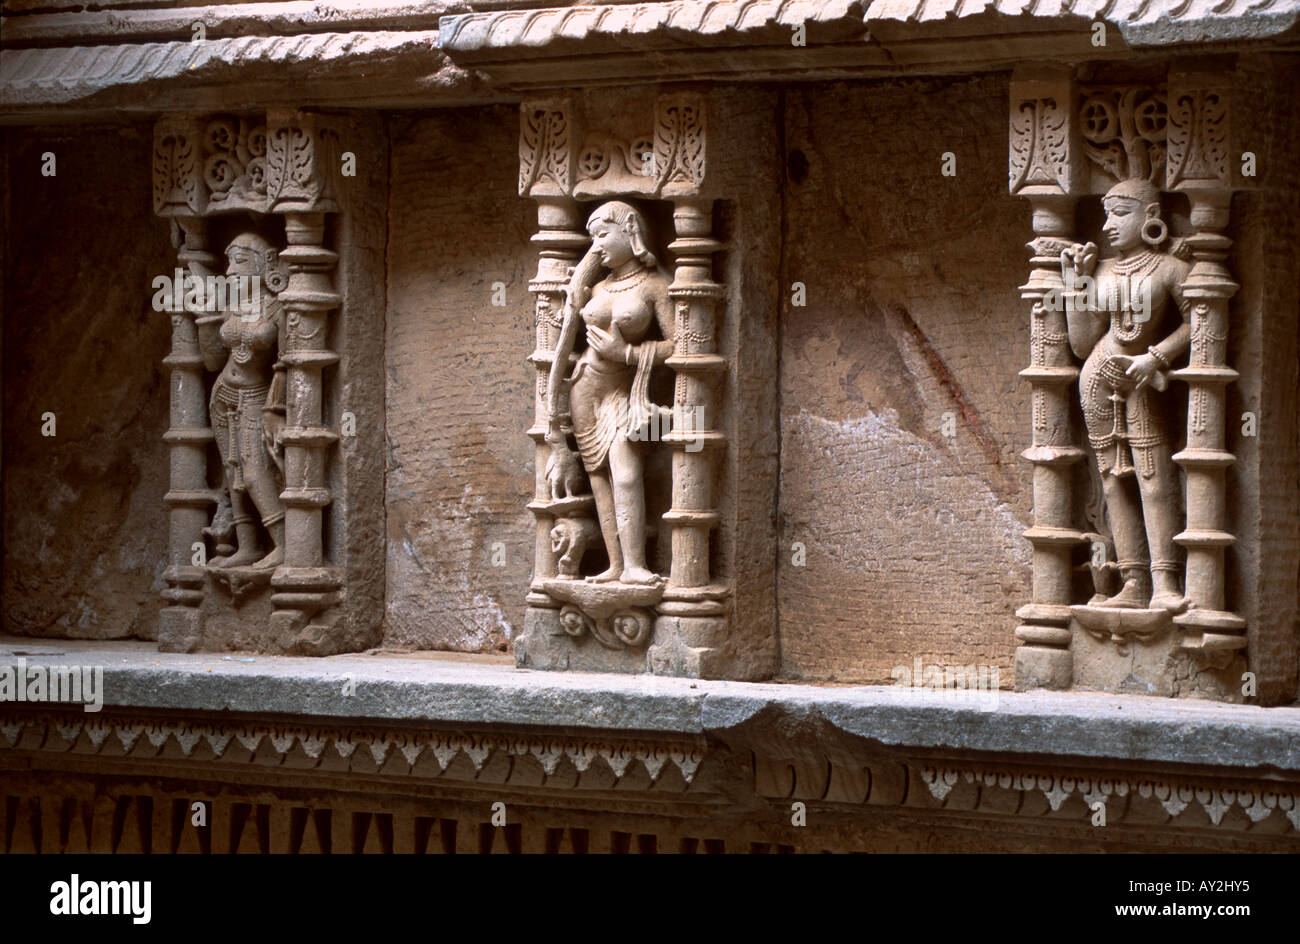 Carved stone figures, Patan step well called the Rani ki vav, Gujarat, India. Built about 1050 A.D. Stock Photo